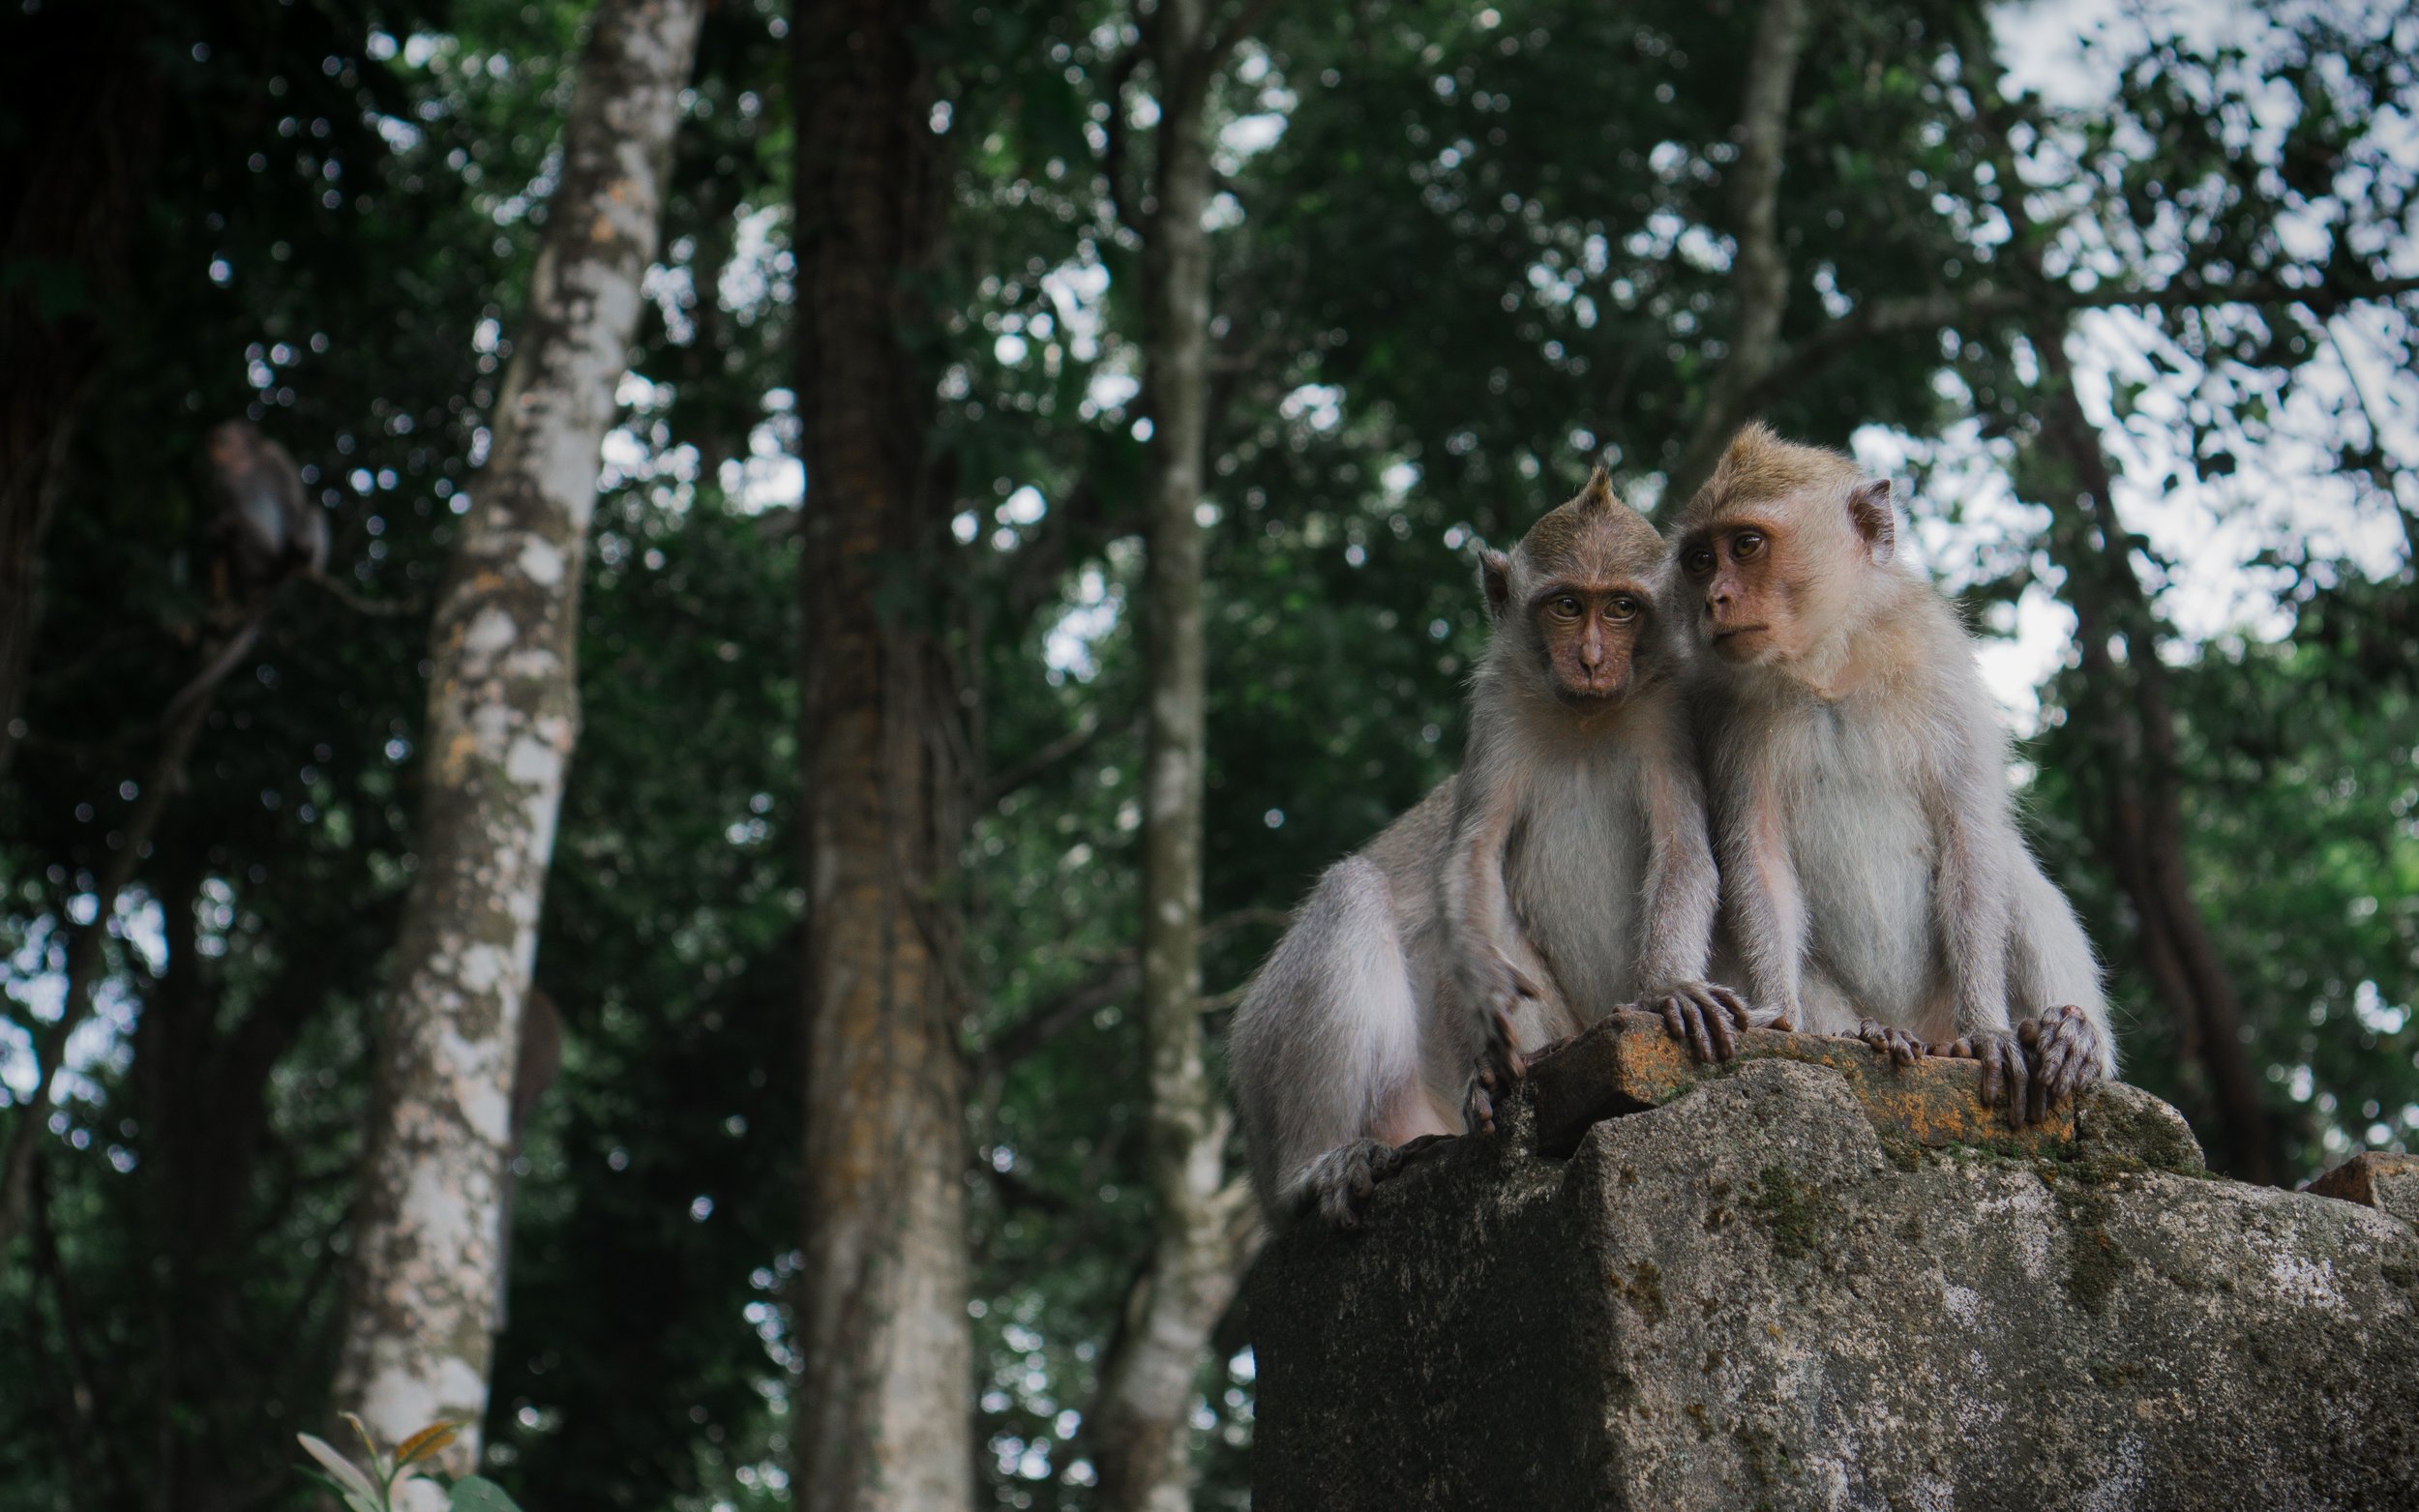 Hang out with monkeys at the monkey forest